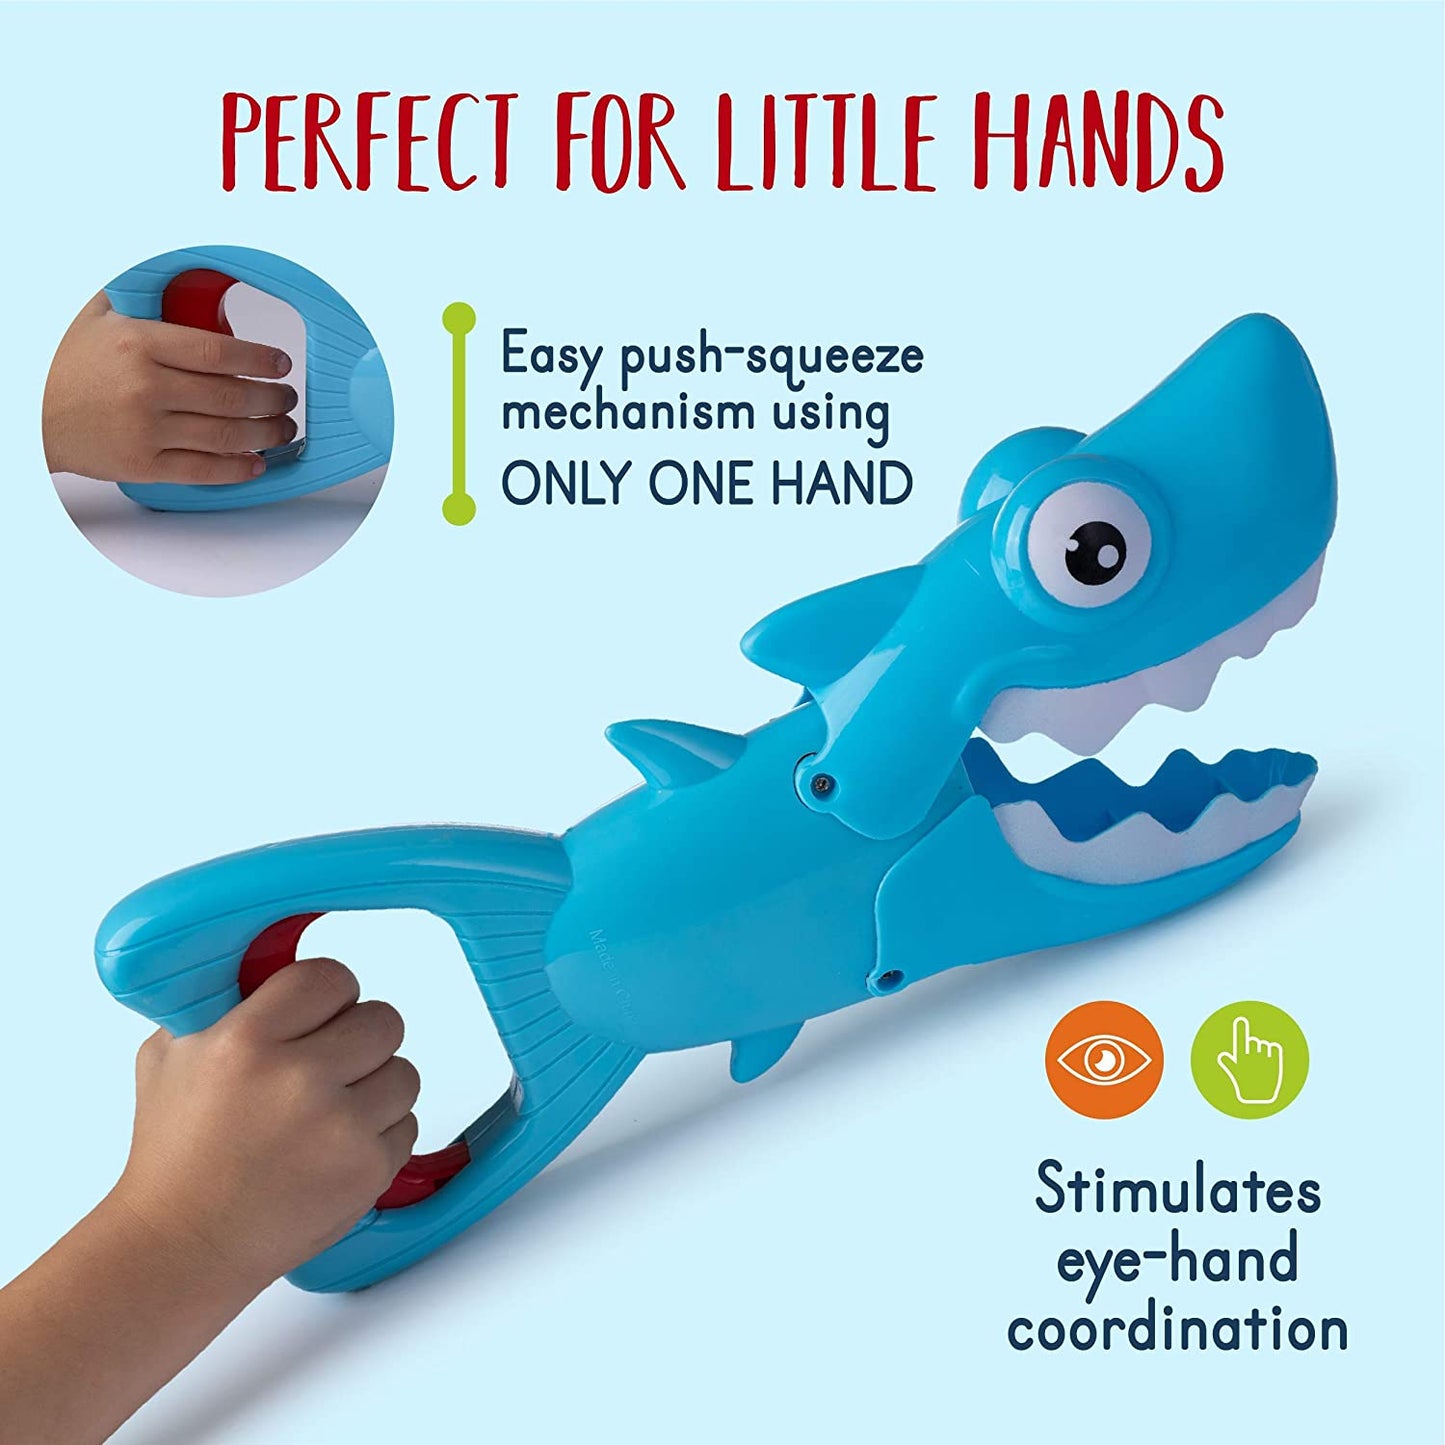 Shark Grabber Baby Bath Toys - Blue Shark with Teeth Biting Action Include 8 Toy Fish and Net, Bath Toys for Boys Girls Toddlers